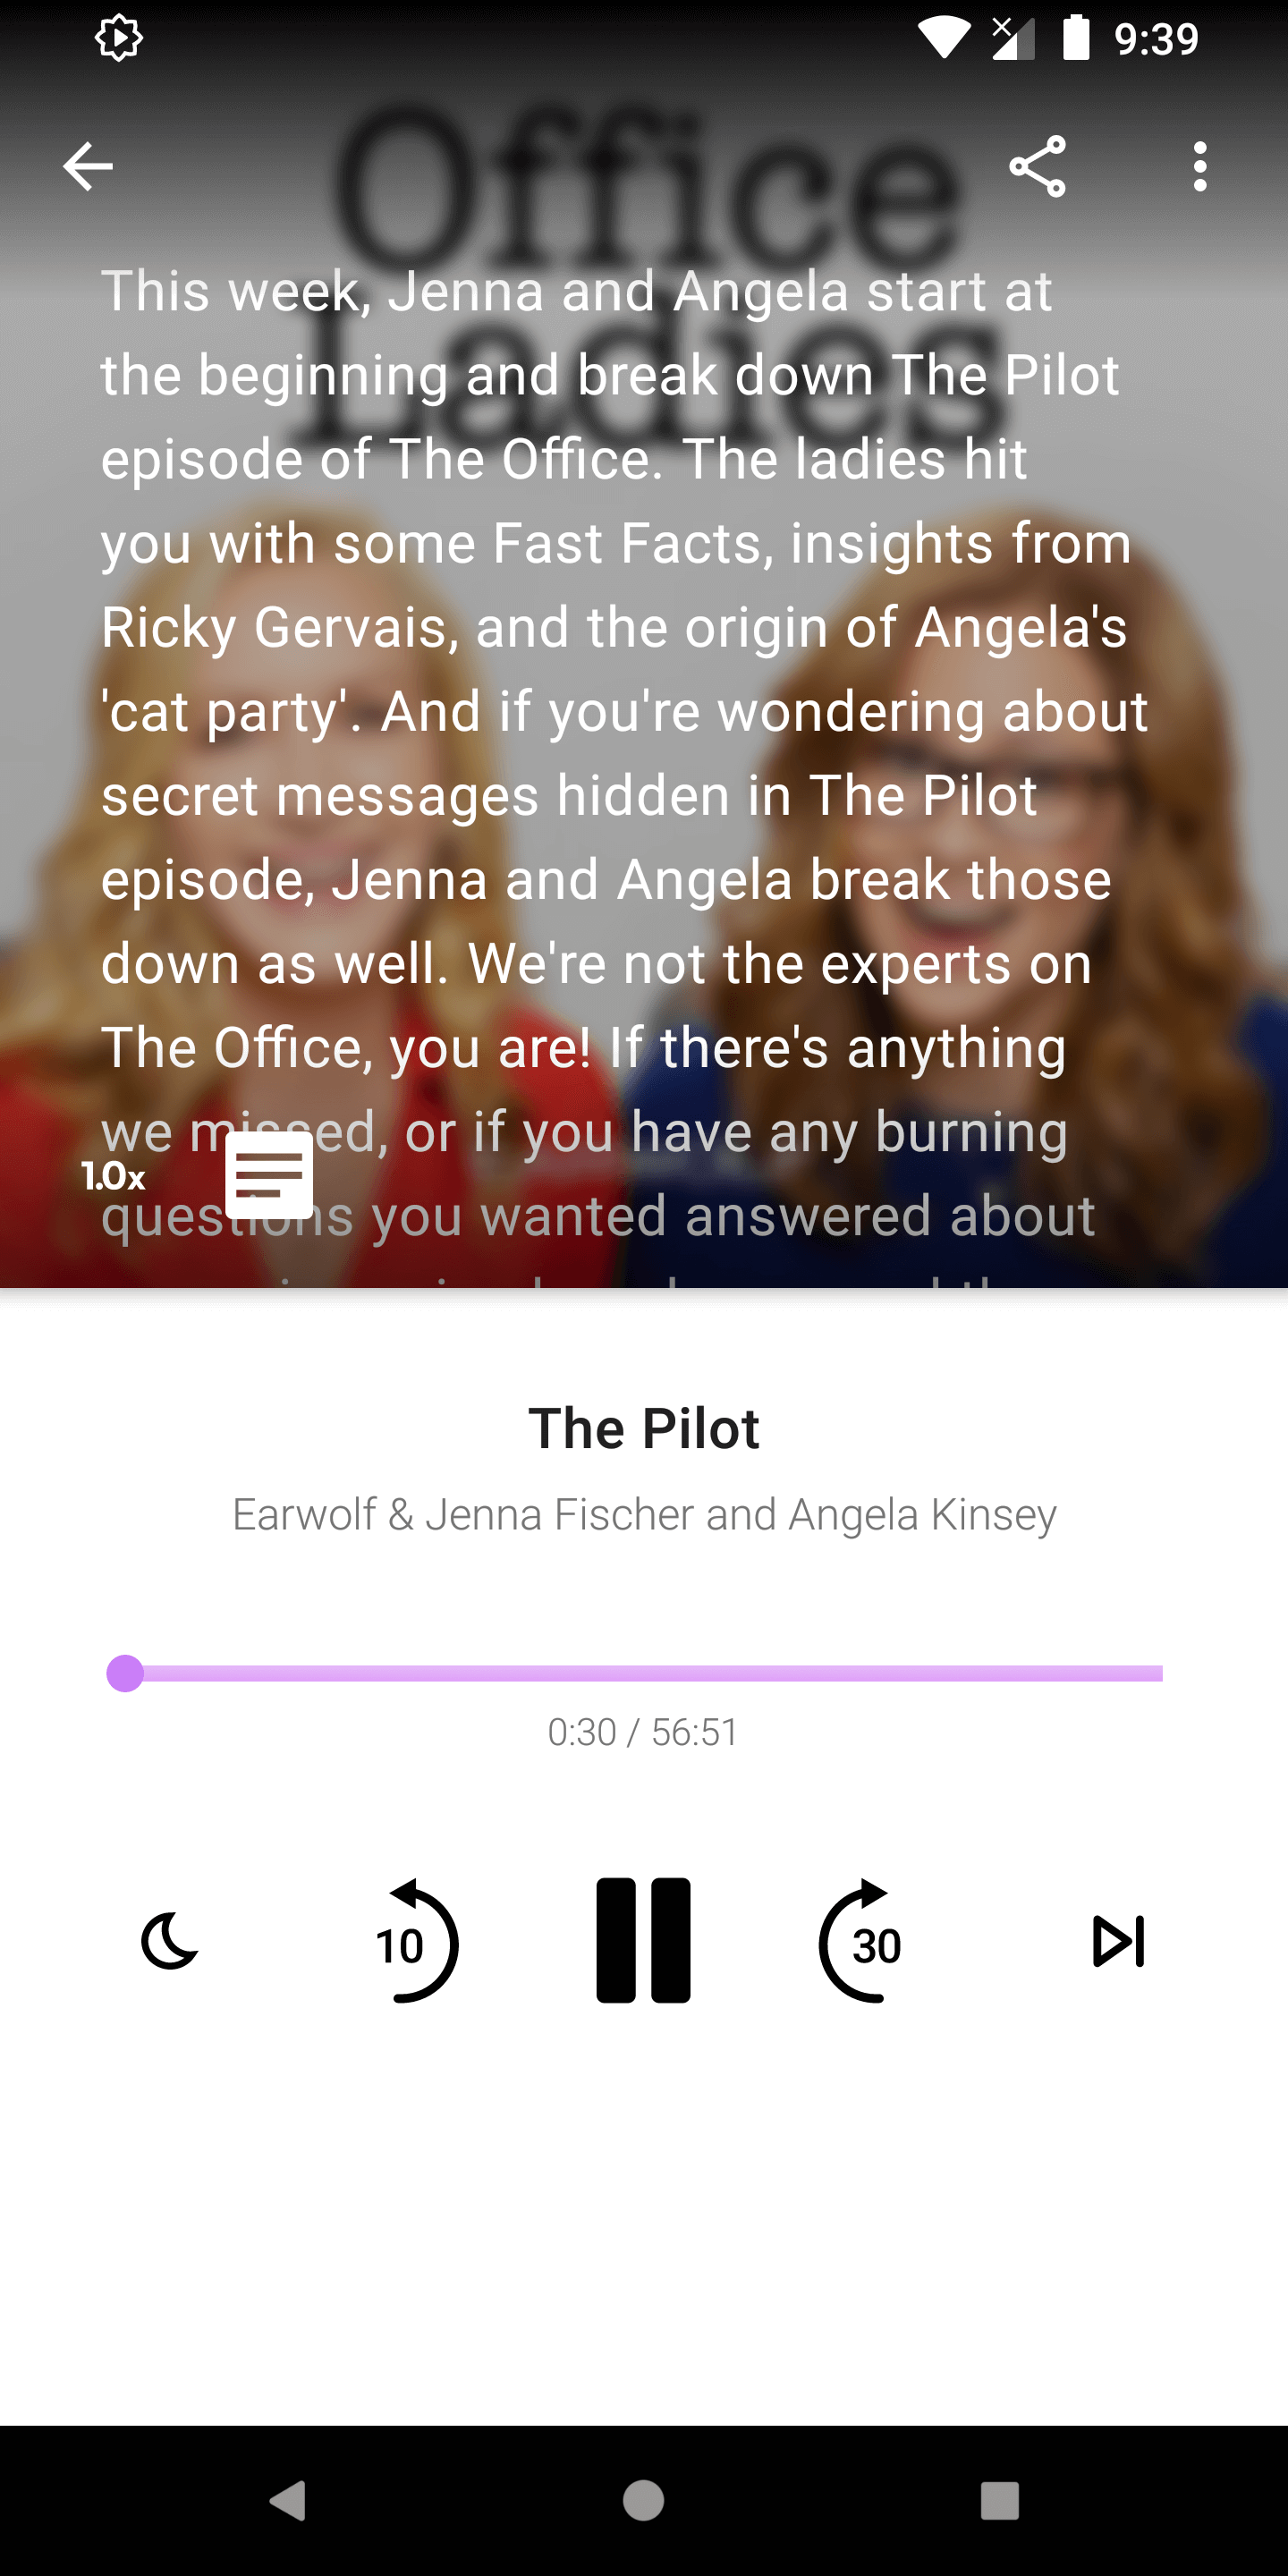 podcast app features in release 1.6.8